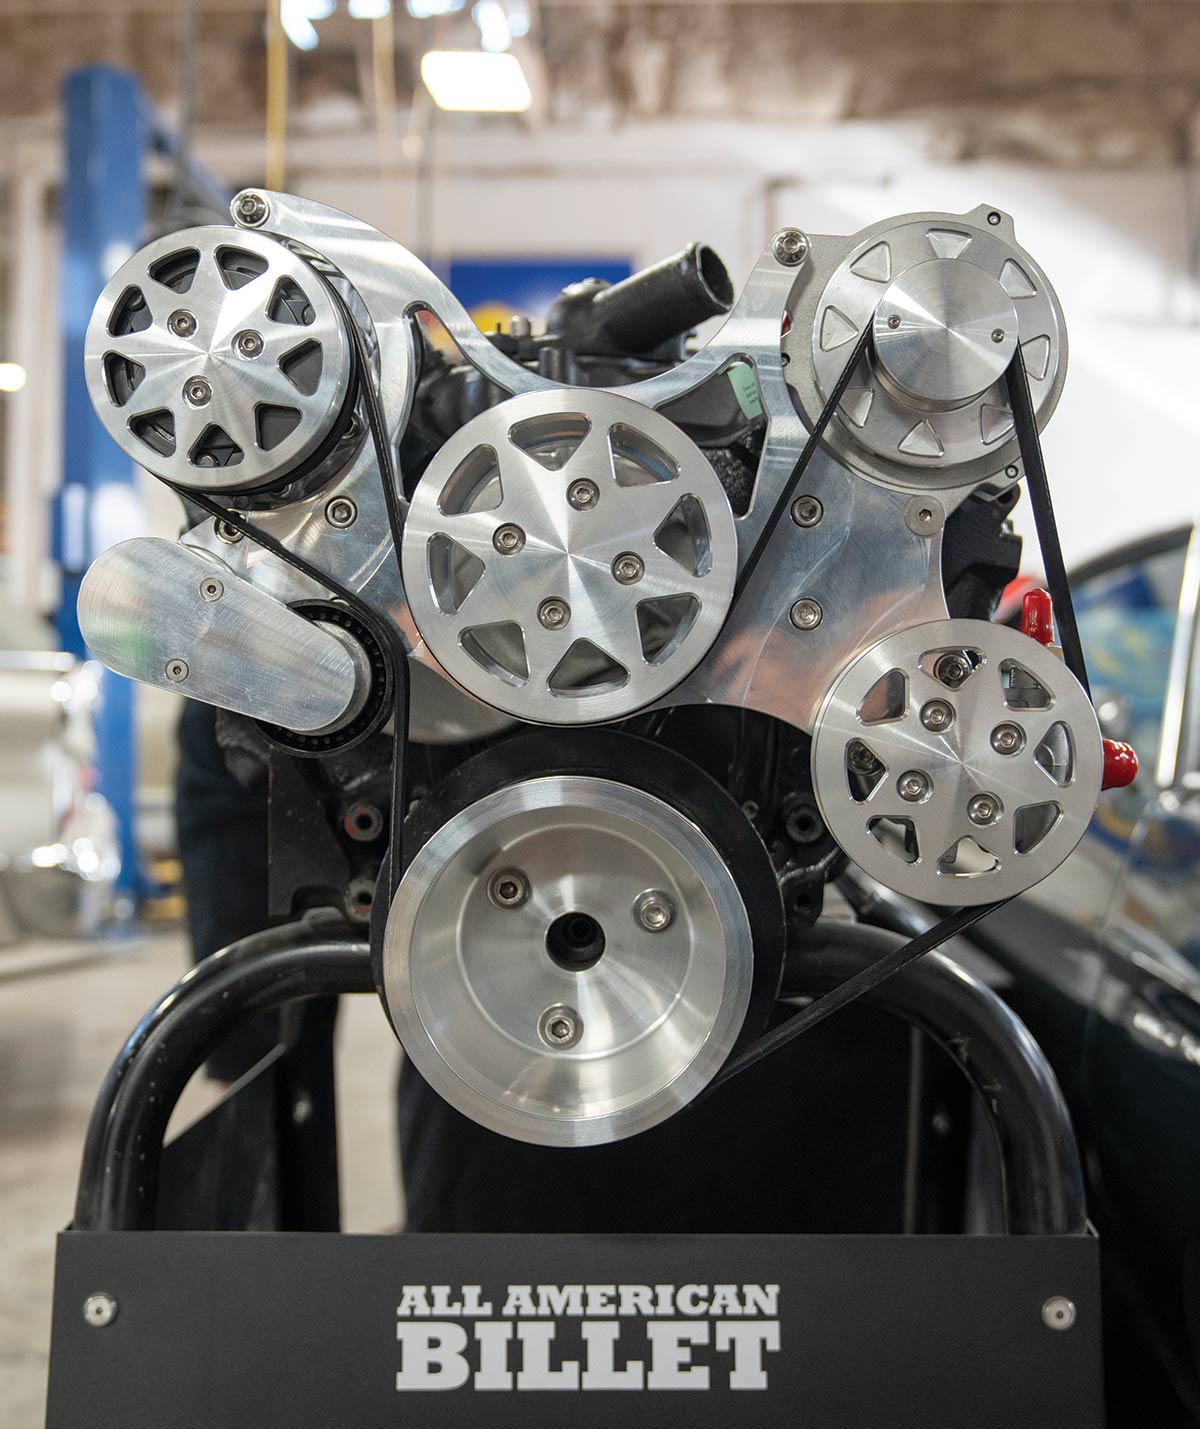 With your front drive system fully buttoned up, follow All American Billet’s in-depth instructions on fluids and everything required to get your truck back on the road … then, enjoy the modern fruit of your labor!